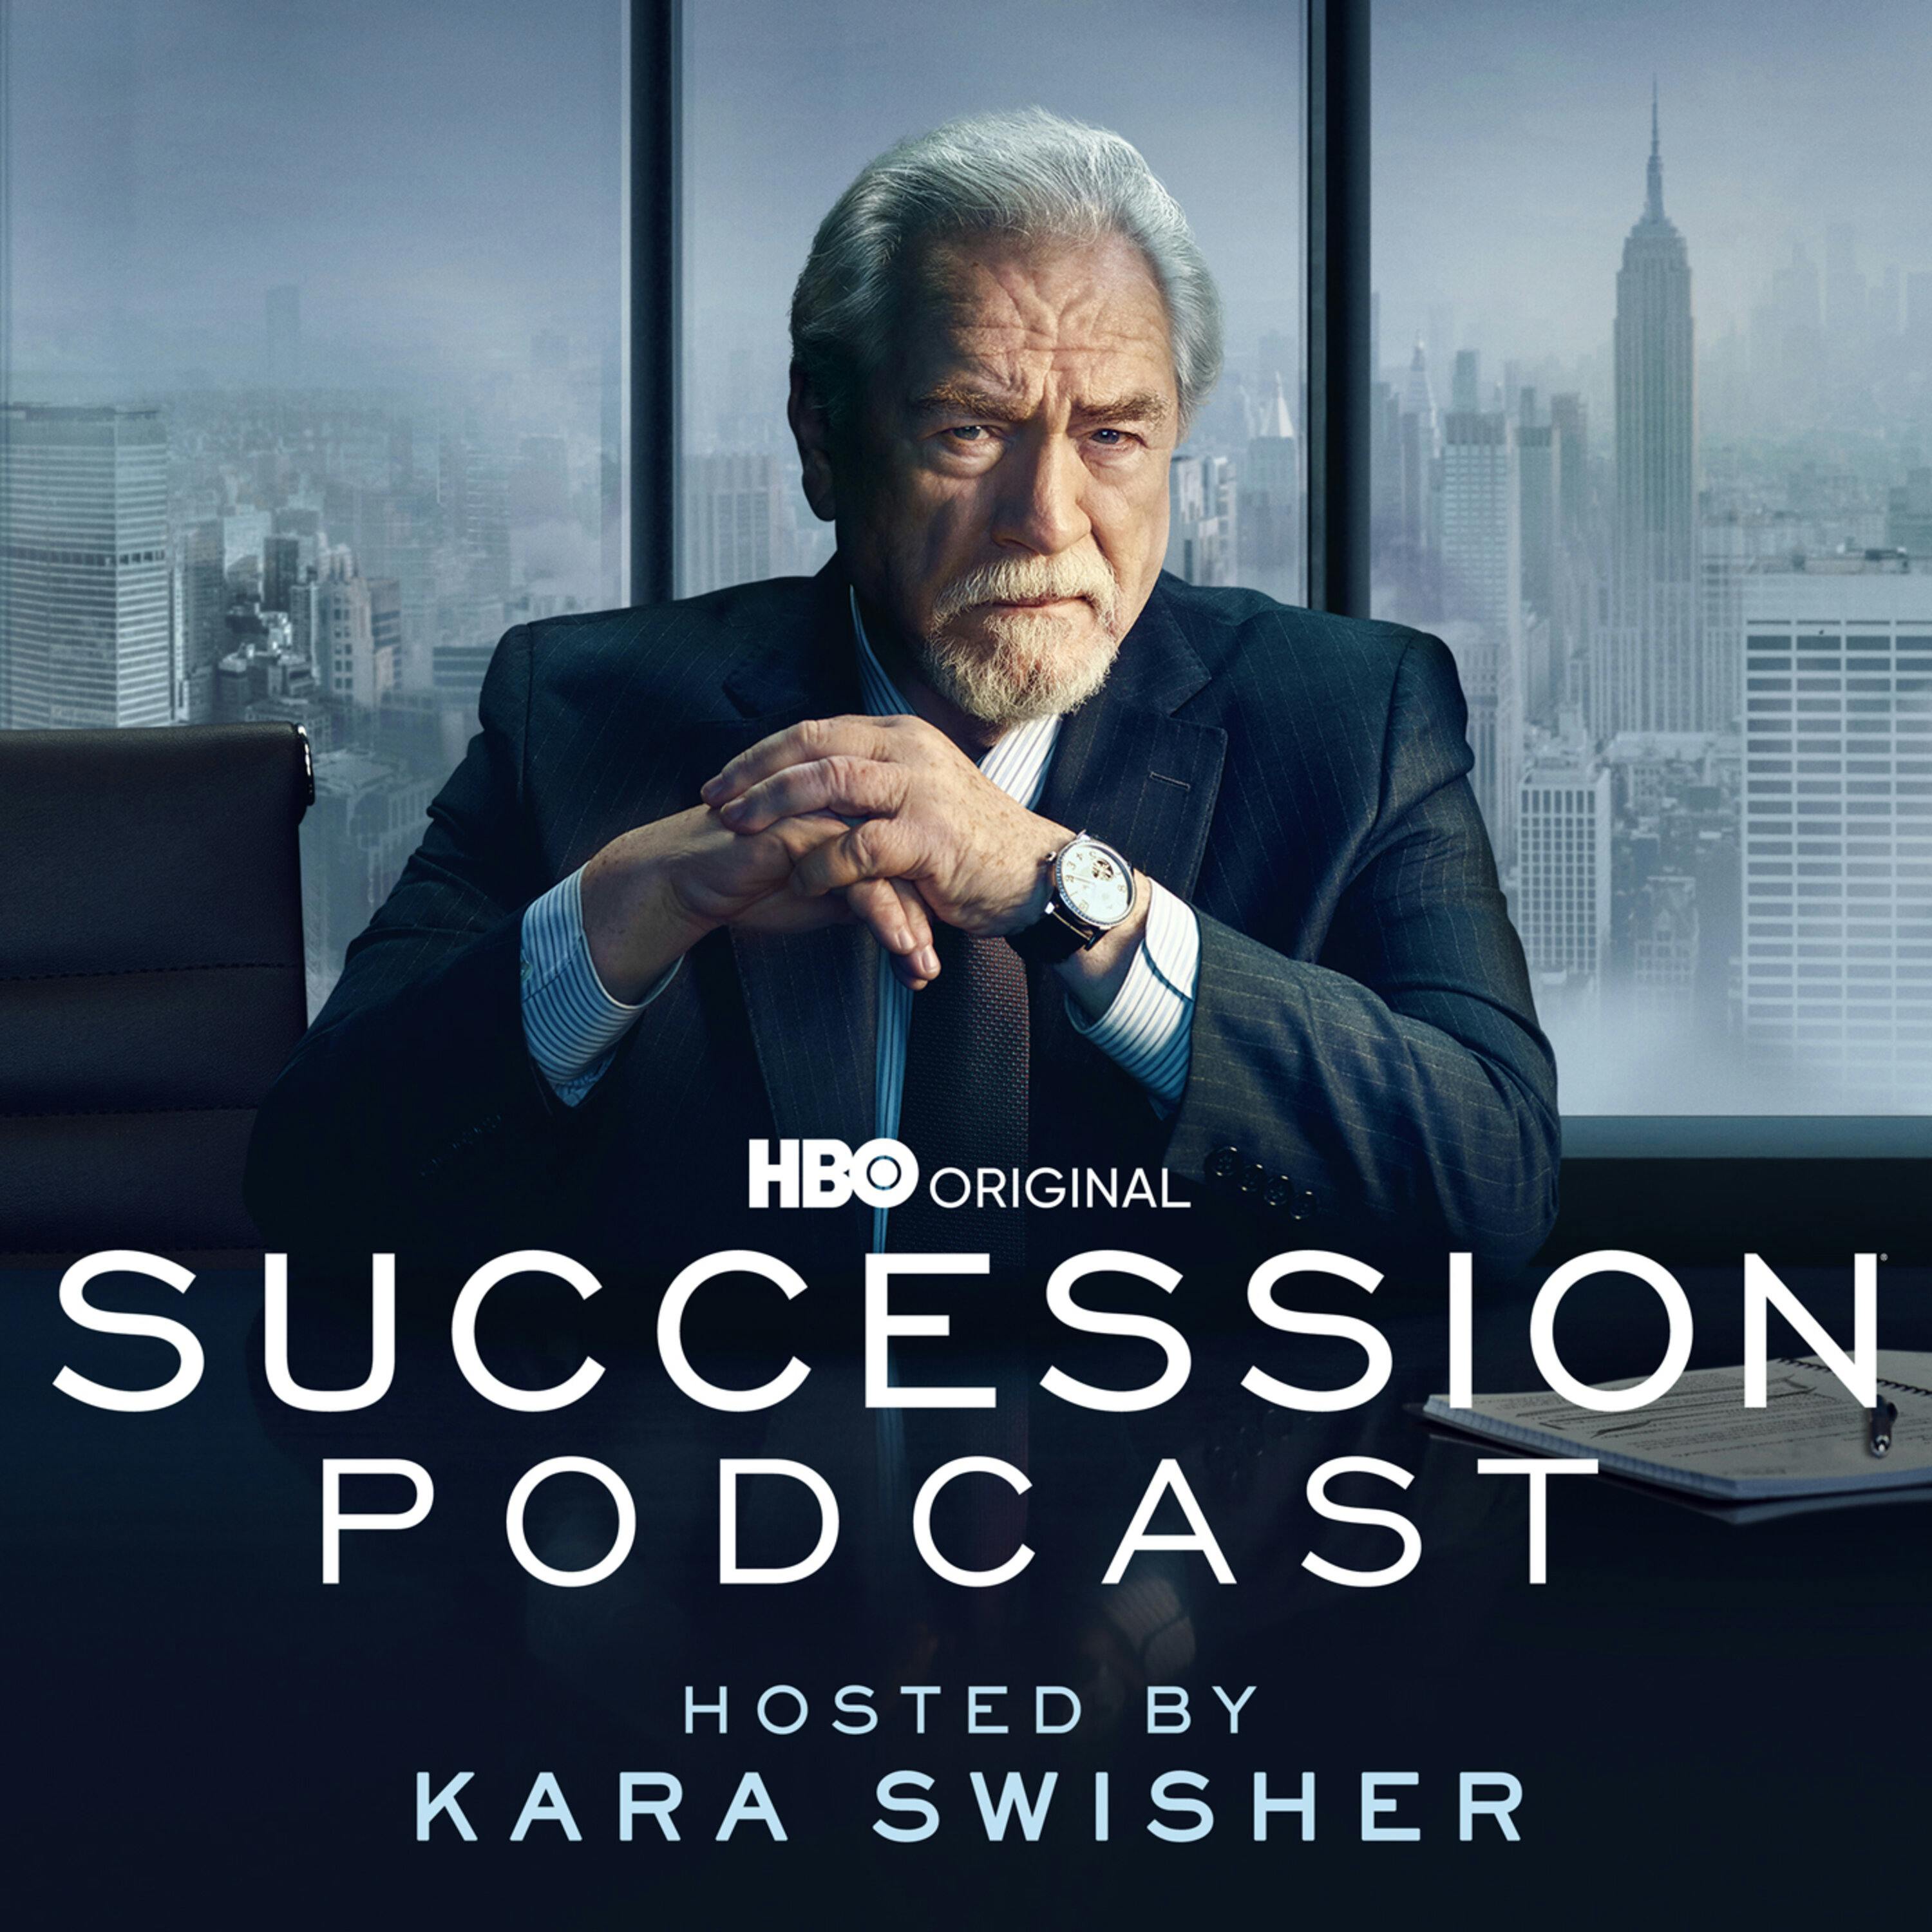 HBO's Succession Podcast podcast show image